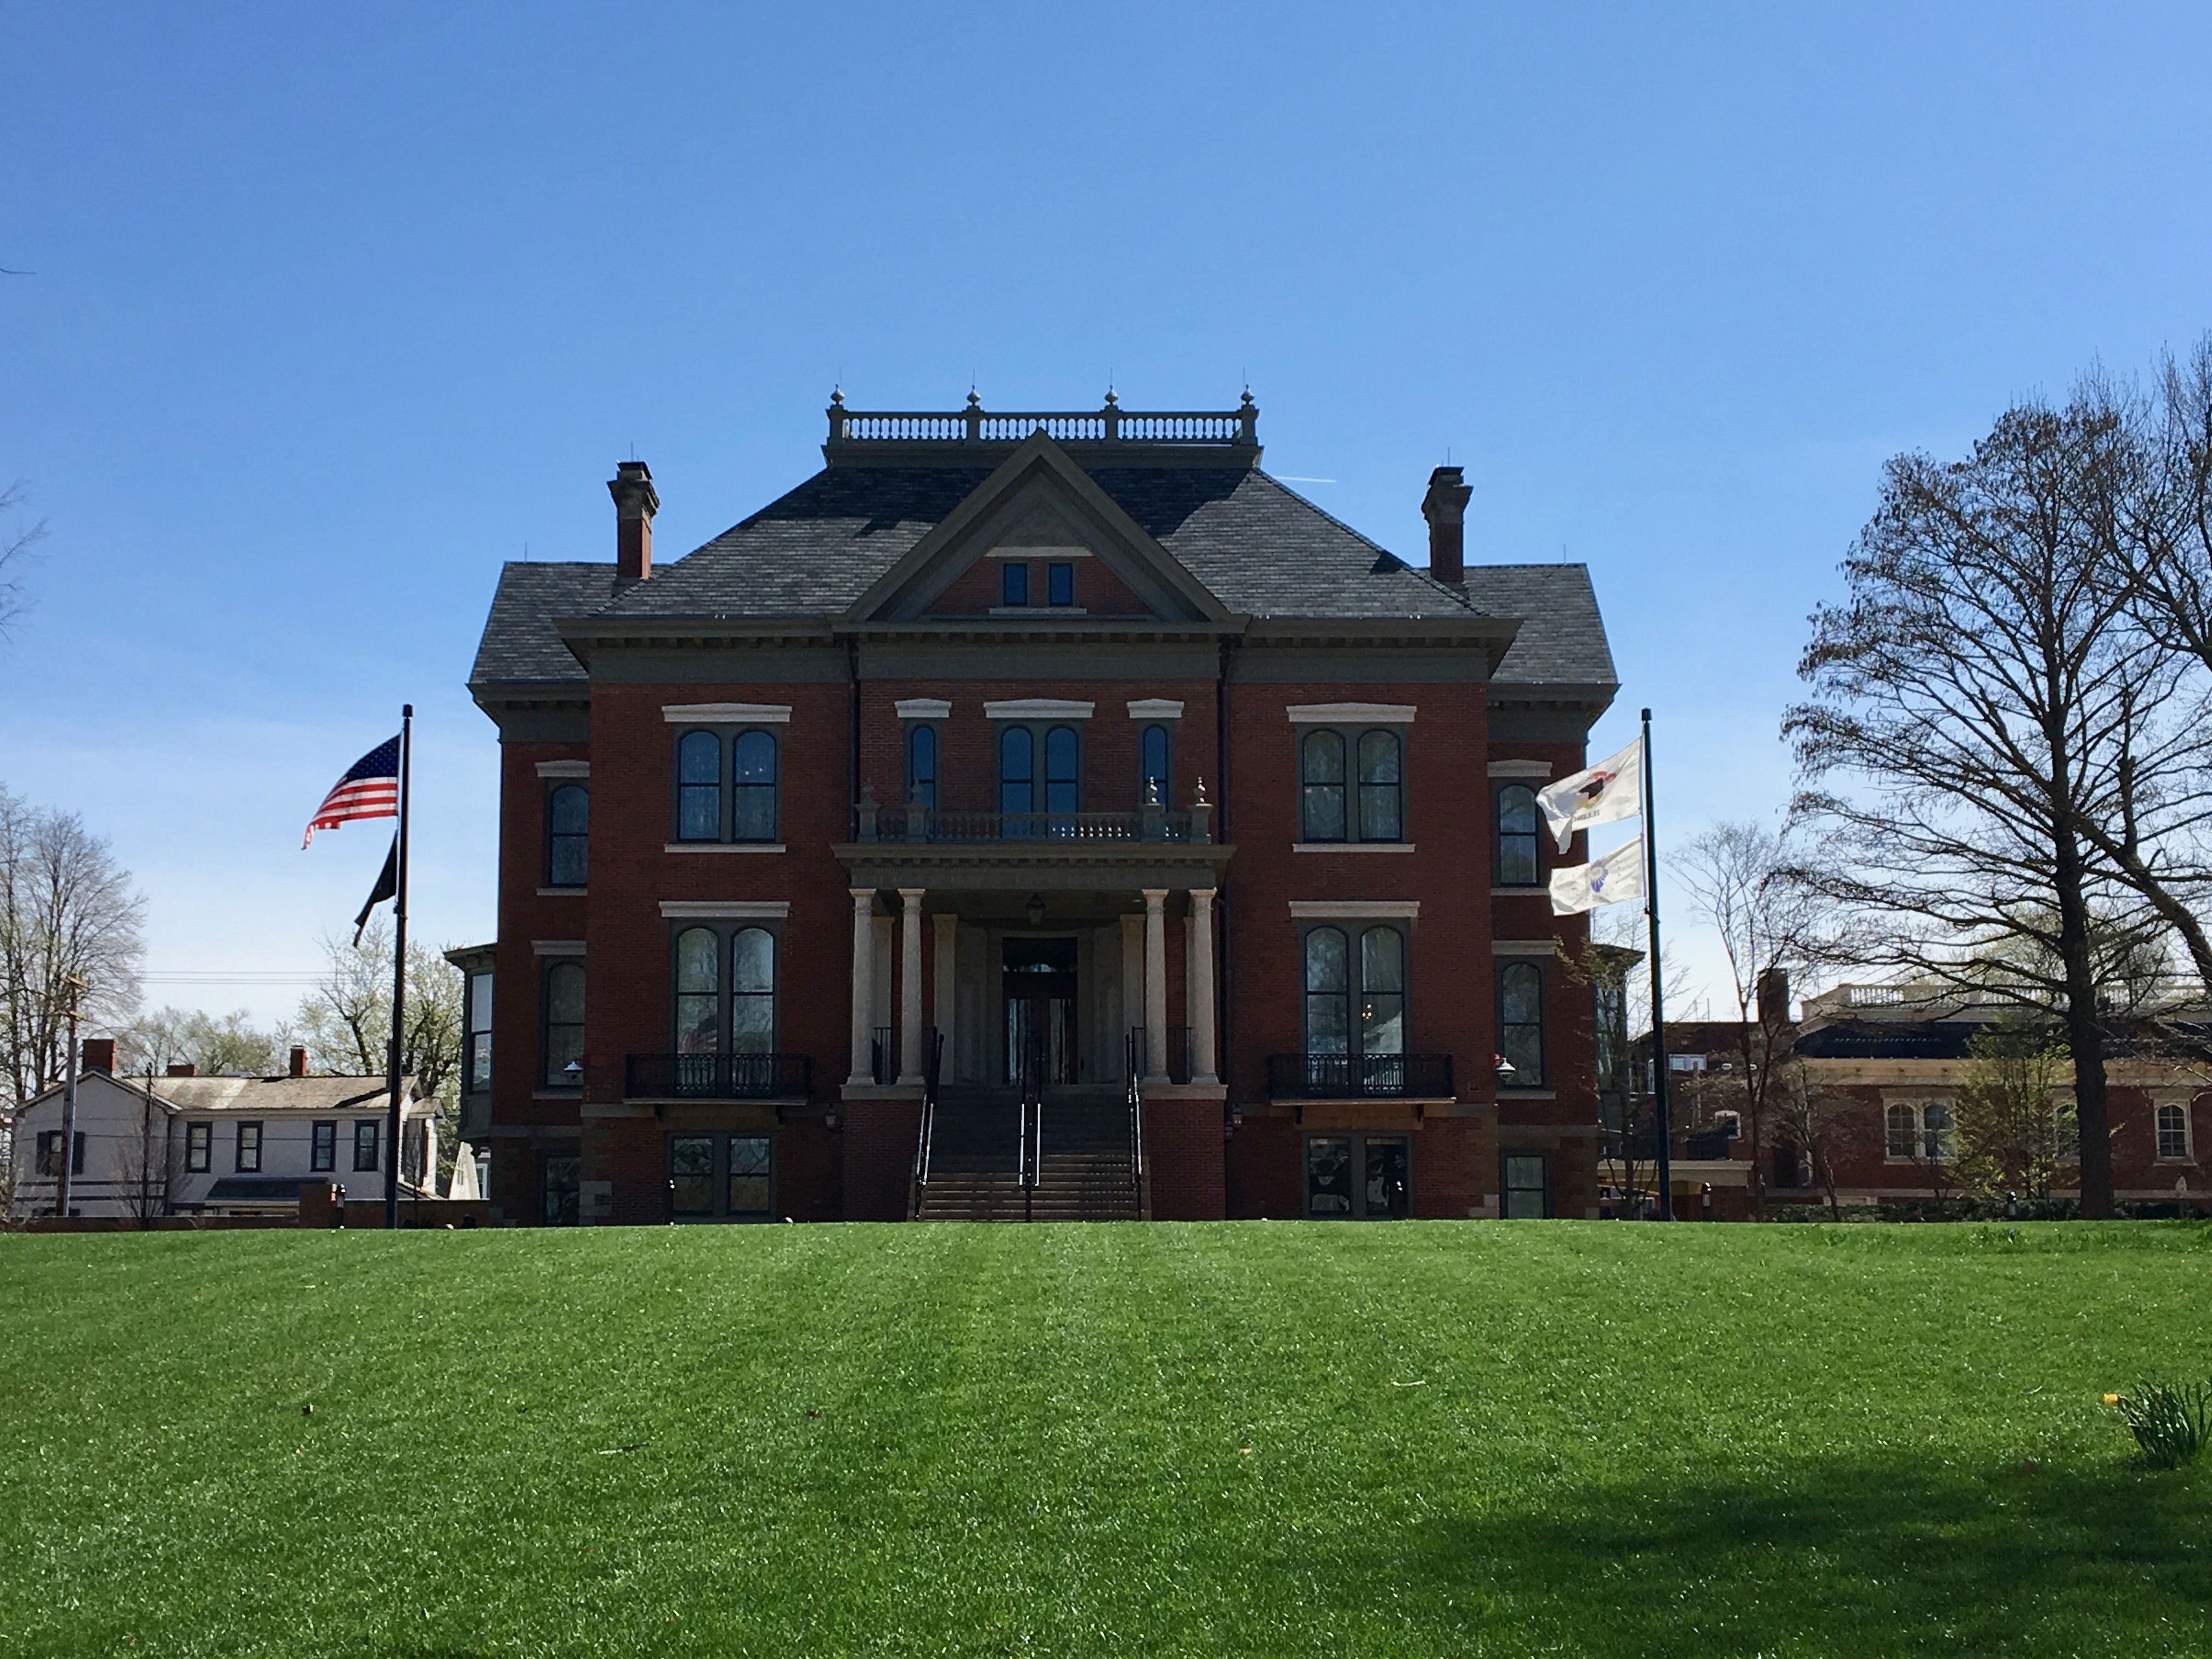 The Illinois Governor's Mansion in Springfield, Illinois. Image courtesy of Resilient Heritage. United States, 2019.